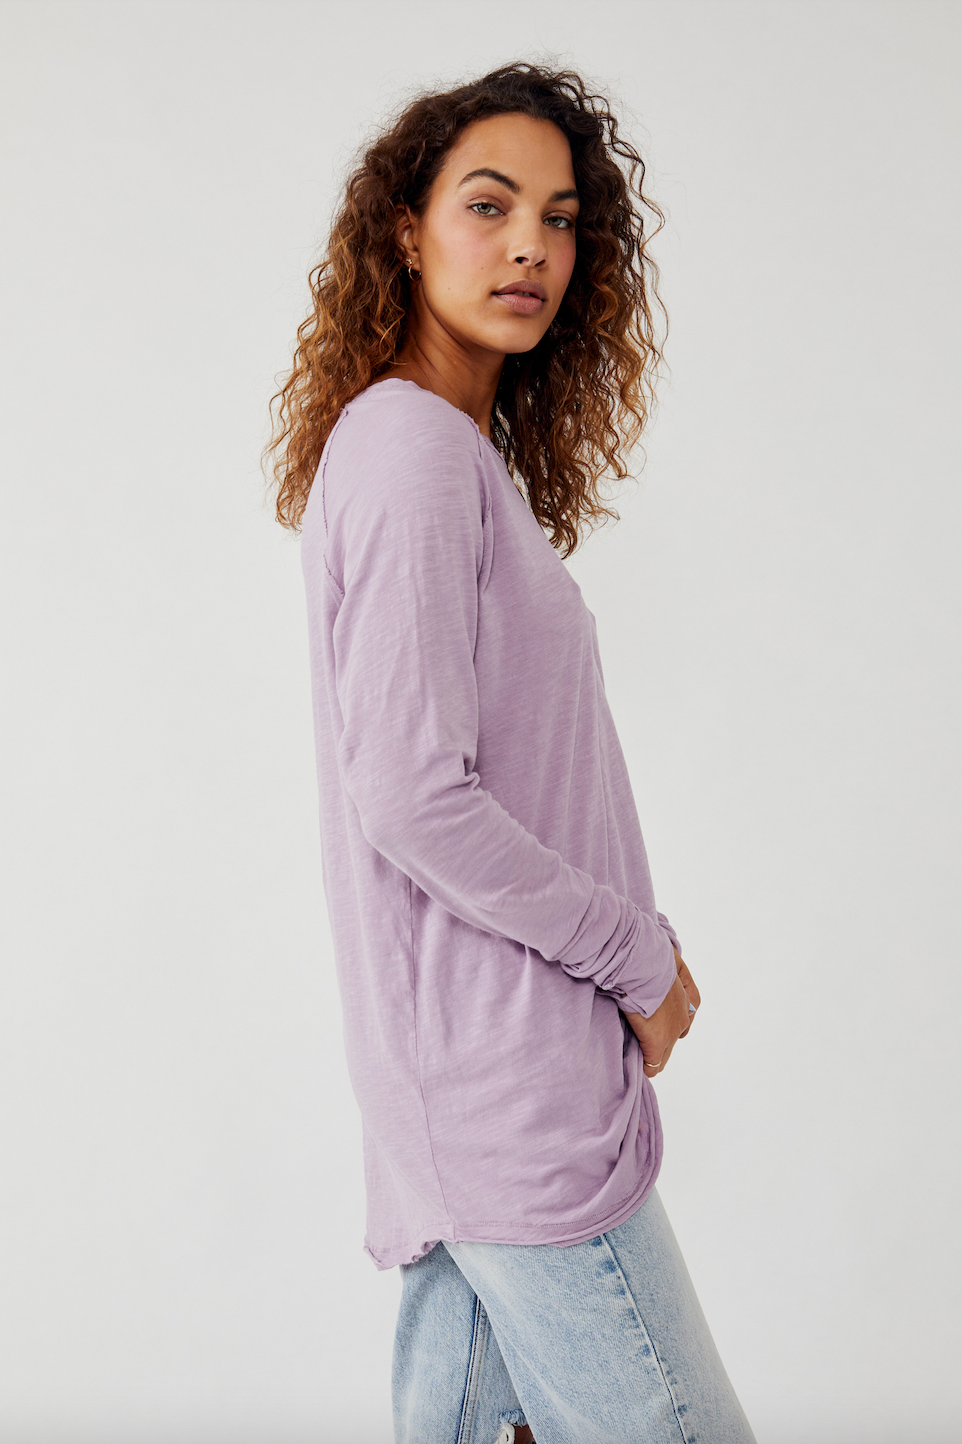 FREE PEOPLE ARDEN TEE IN MAUVE MOUSSE